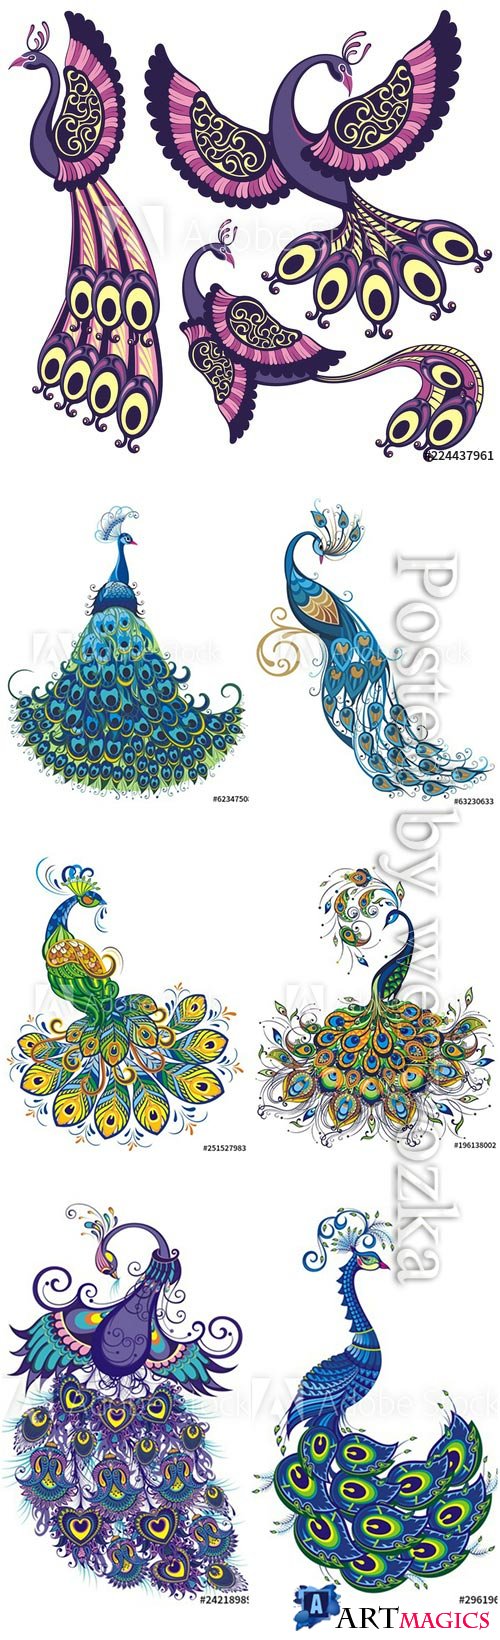 Peacock fantasy vector birds isolated on a white background